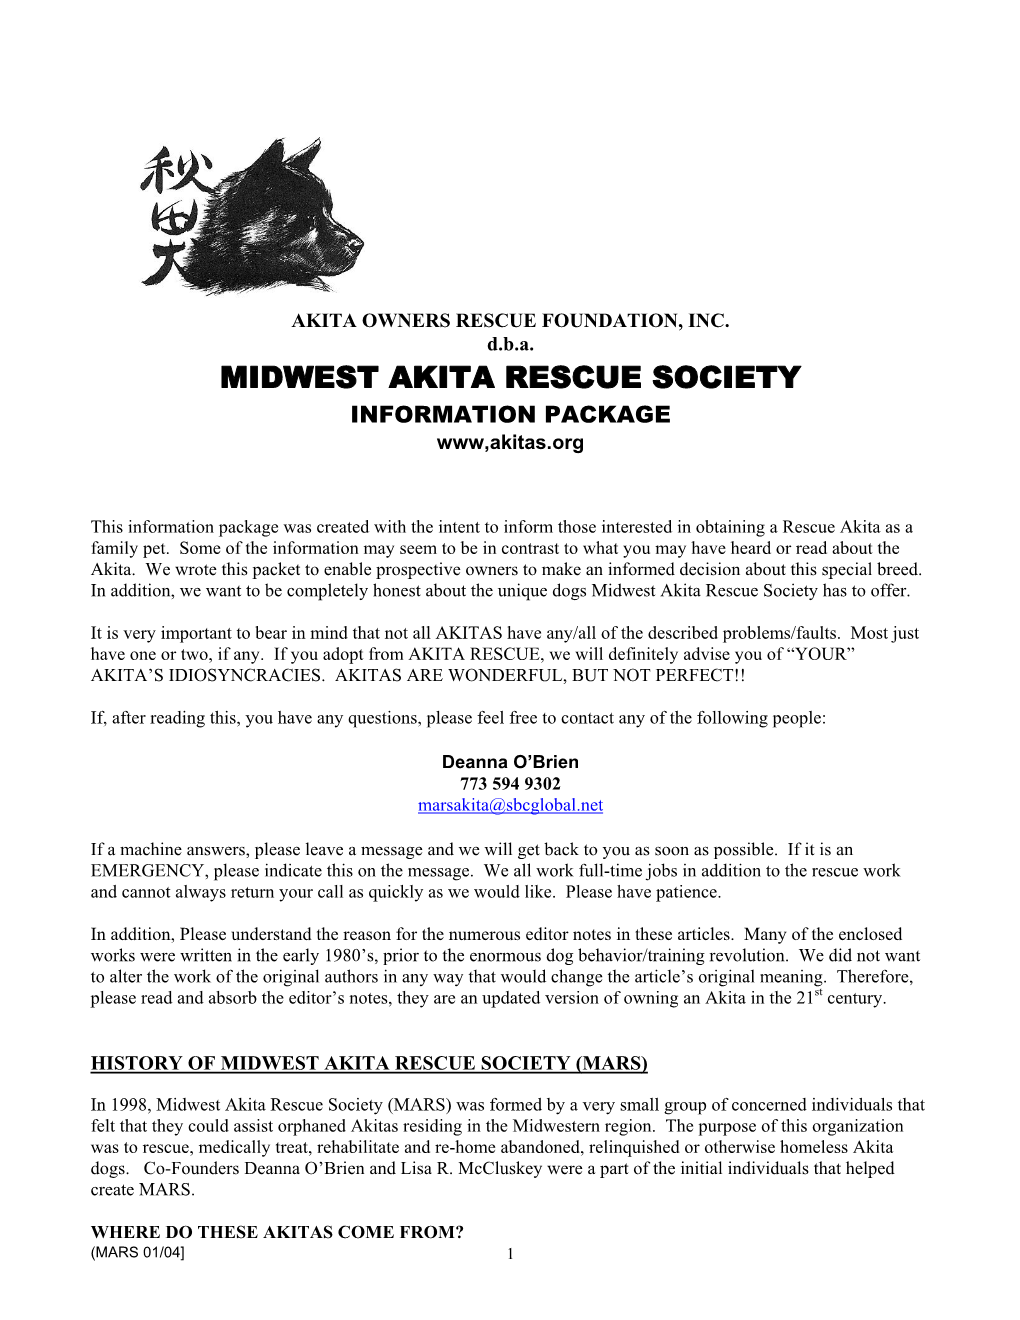 MIDWEST AKITA RESCUE SOCIETY INFORMATION PACKAGE Www,Akitas.Org